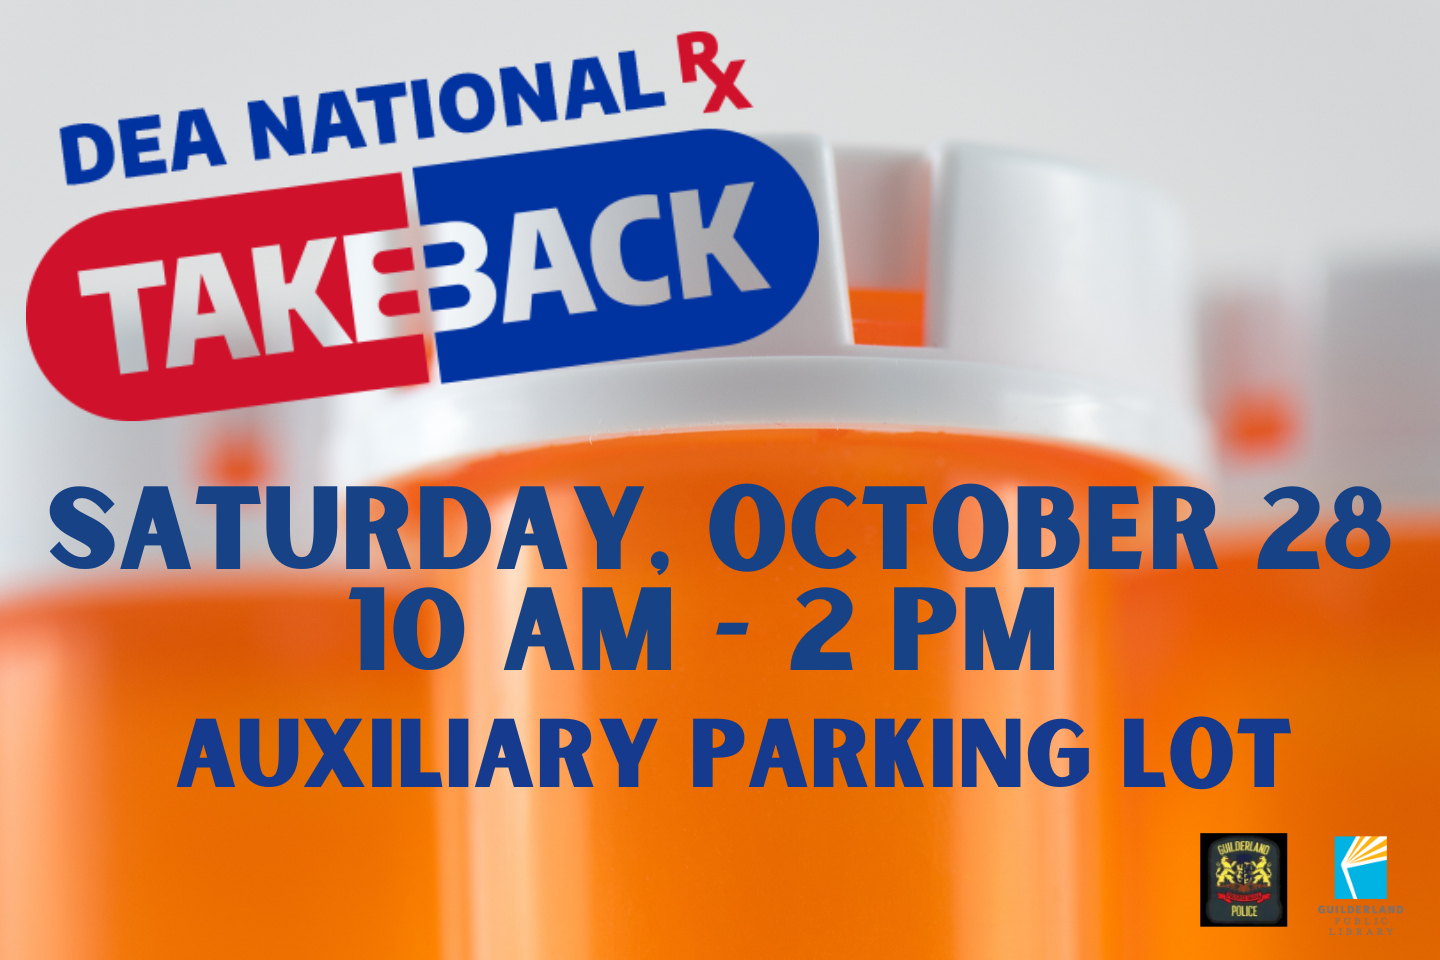 Drug Take-Back Day sign with date and location listed